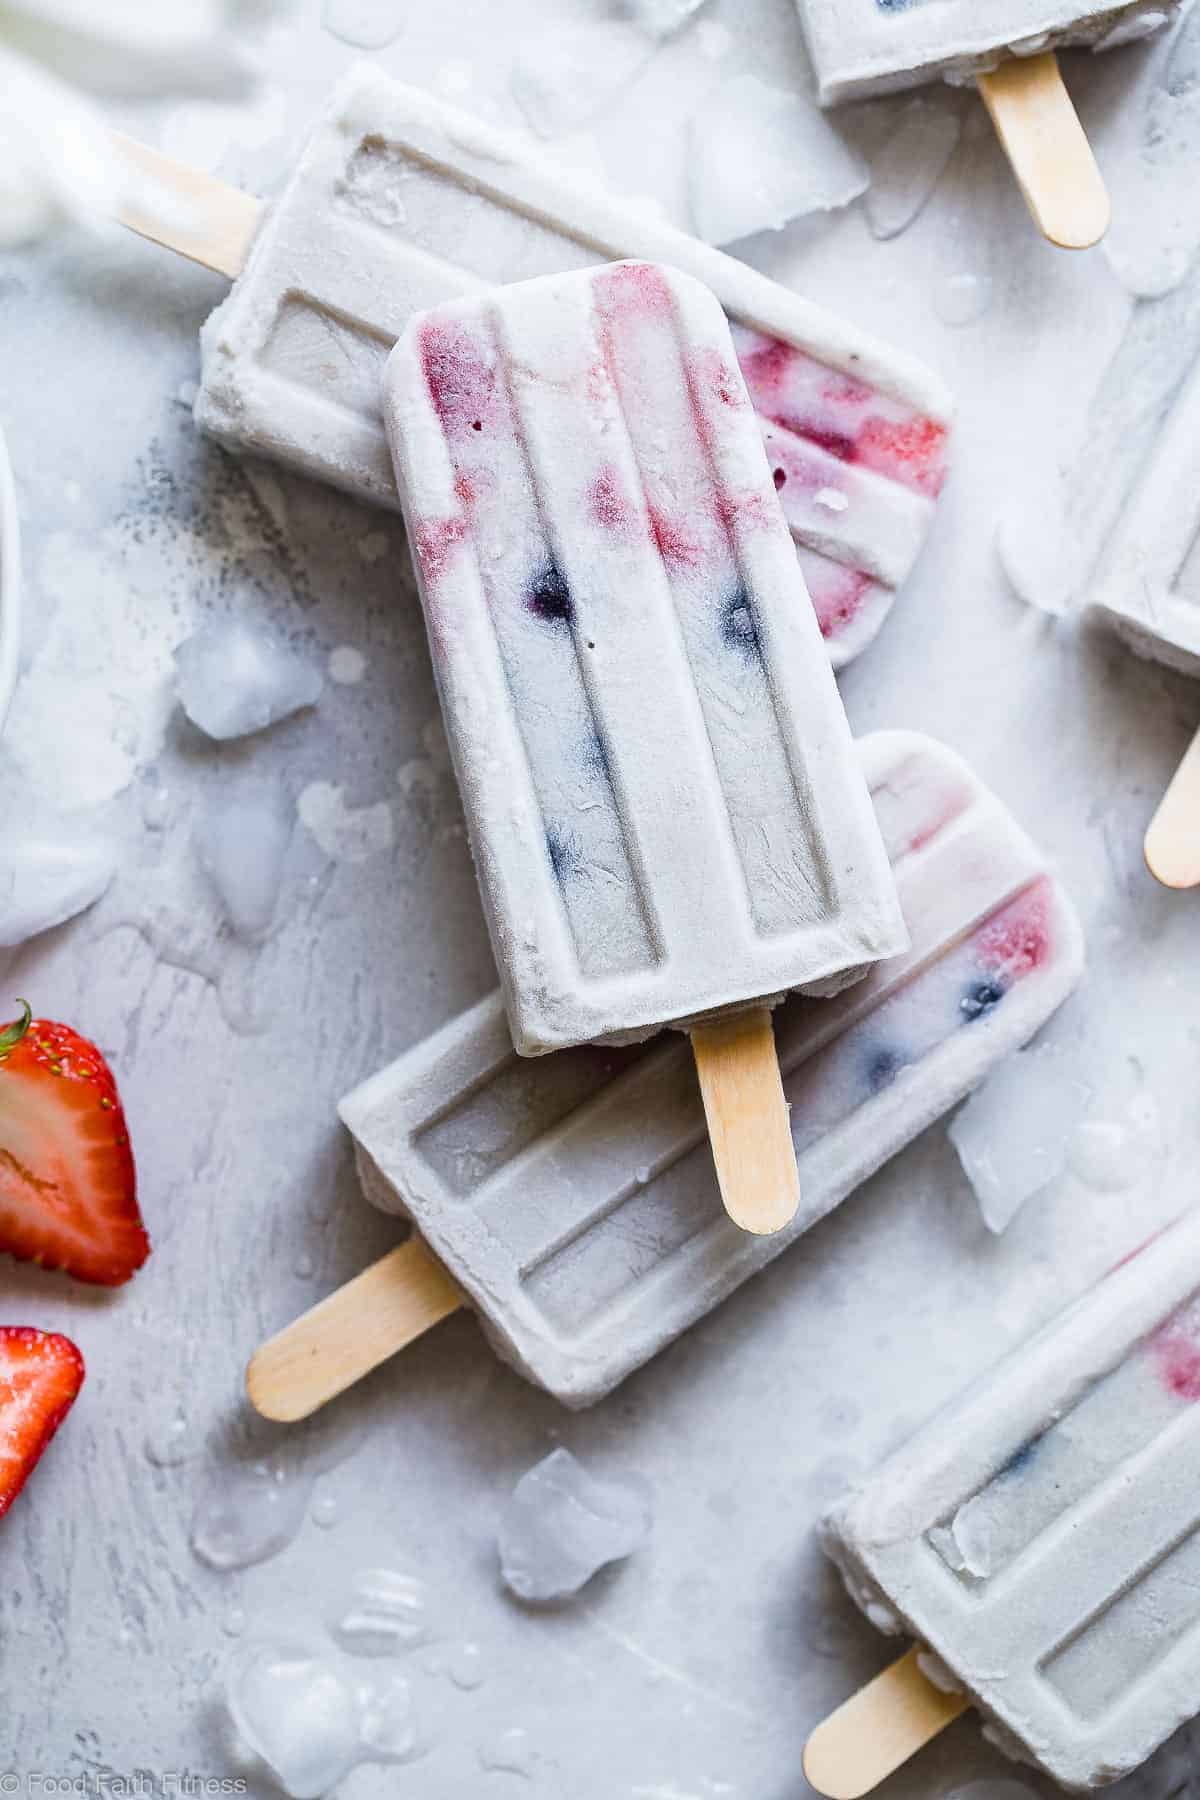 Red, White and Blueberry Paleo Banana Pudding Pops - These easy, healthy homemade pudding pops are perfect for the Fourth of July or anytime in the Summer! SO easy and gluten free and paleo/vegan friendly! Kids and adults will LOVE these! | #Foodfaithfitness | #Glutenfree #Healthy #Paleo #Vegan #July4th